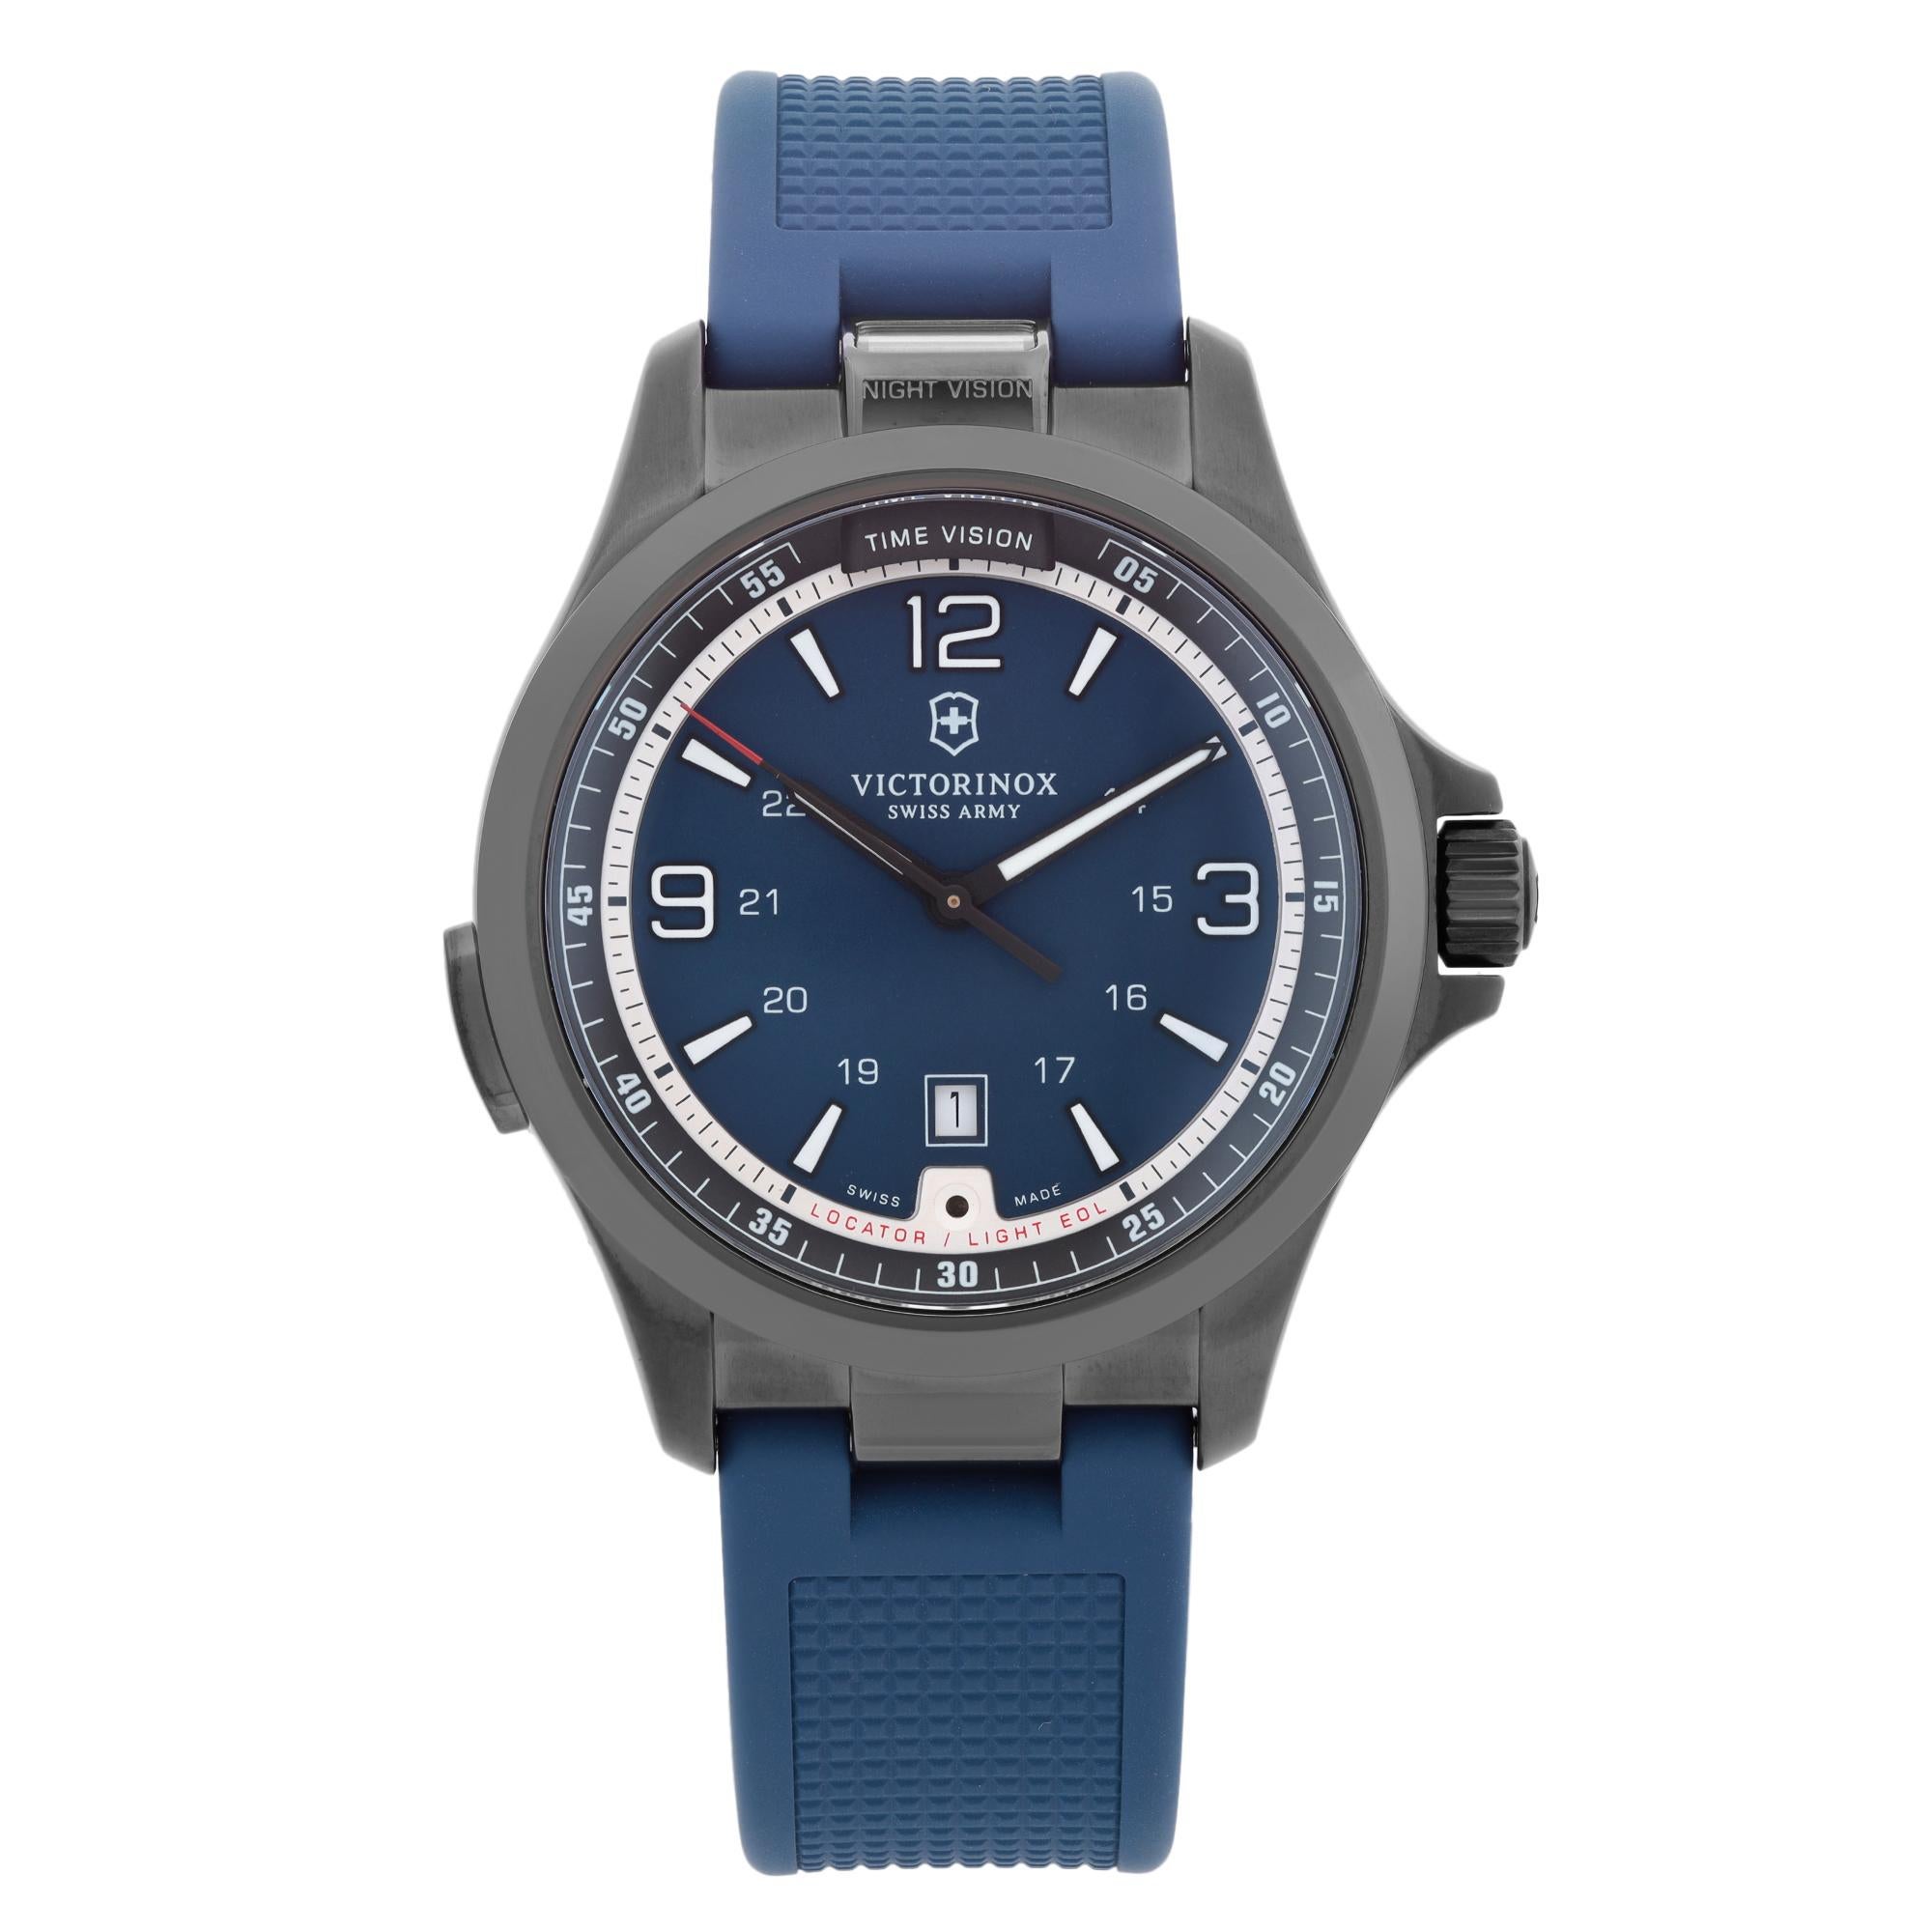 Display model. The original box and paper are not included.

 Brand: Victorinox  Type: Wristwatch  Department: Men  Model Number: 241707  Country/Region of Manufacture: Switzerland  Style: Casual  Model: Victorinox Swiss Army  Vintage: No  Movement: